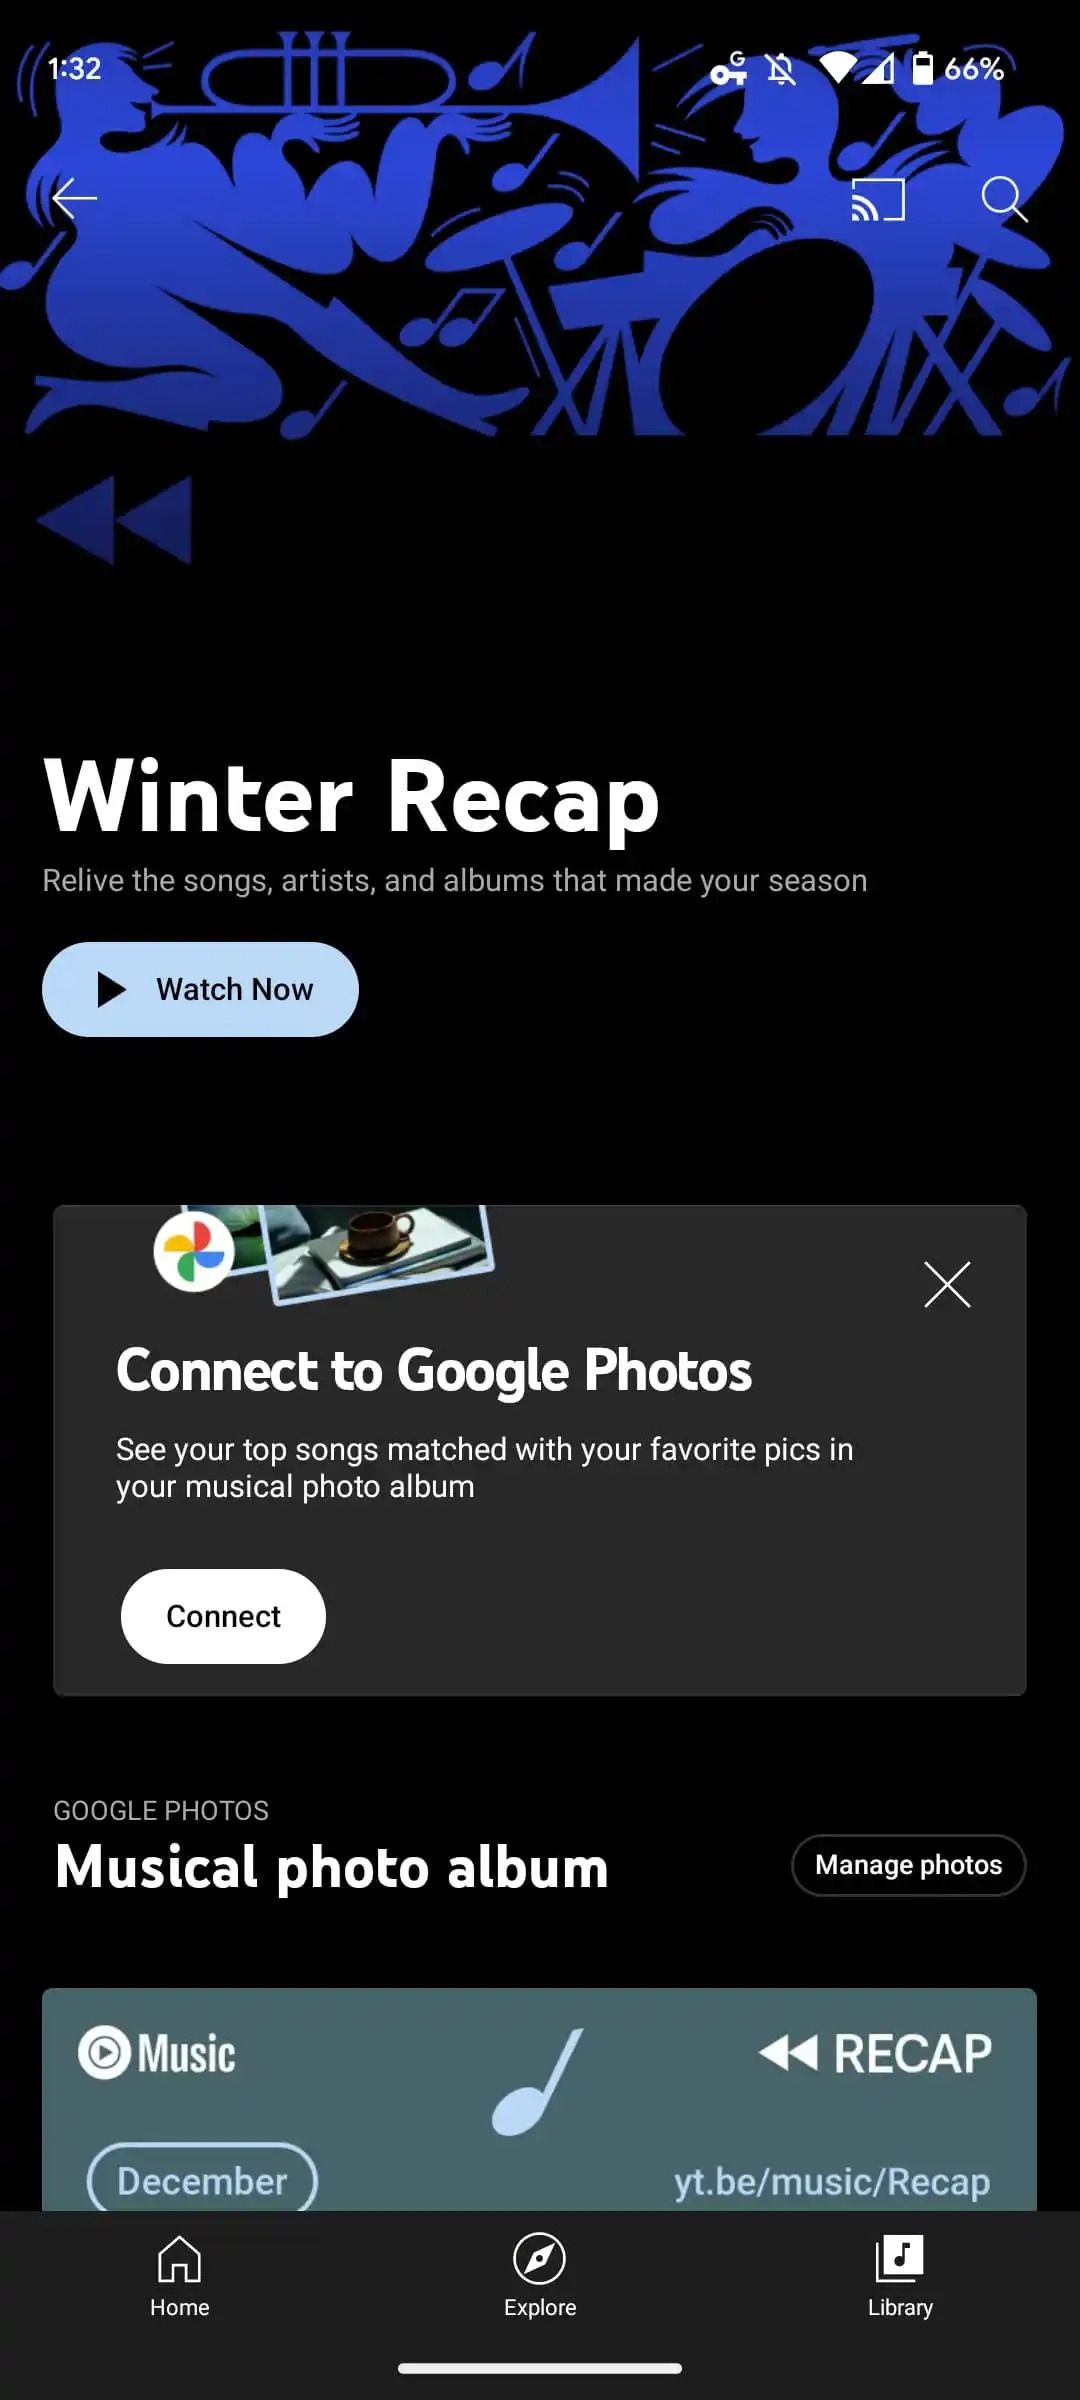 YouTube Music’s Winter Recap is here as a seasonal reminder of your